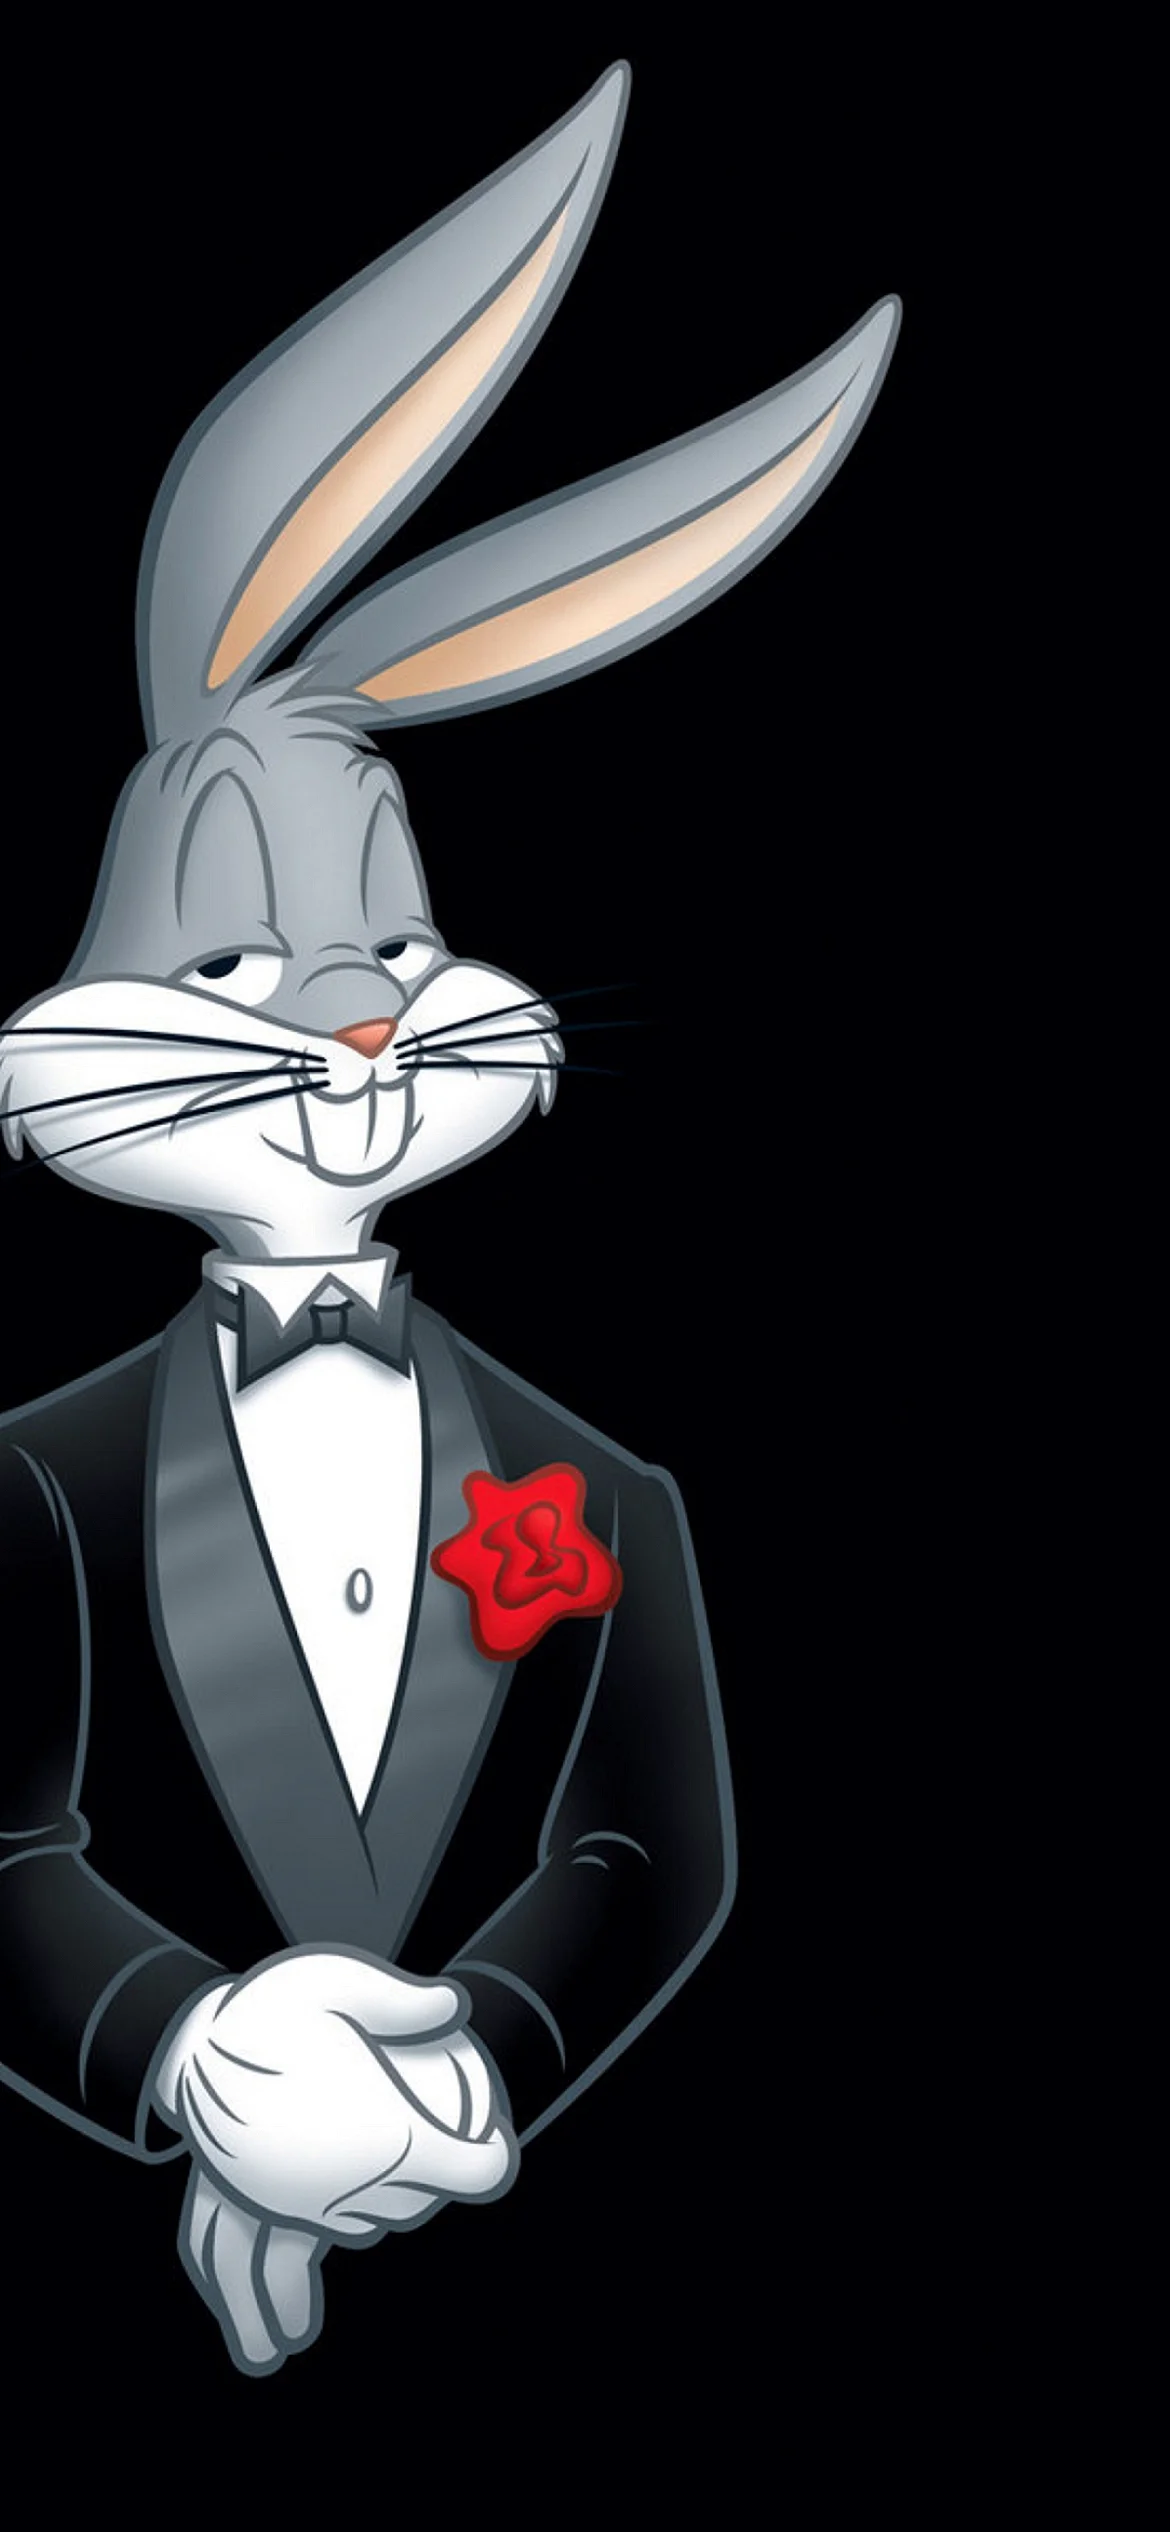 Bugs Bunny Wallpaper for iPhone 13